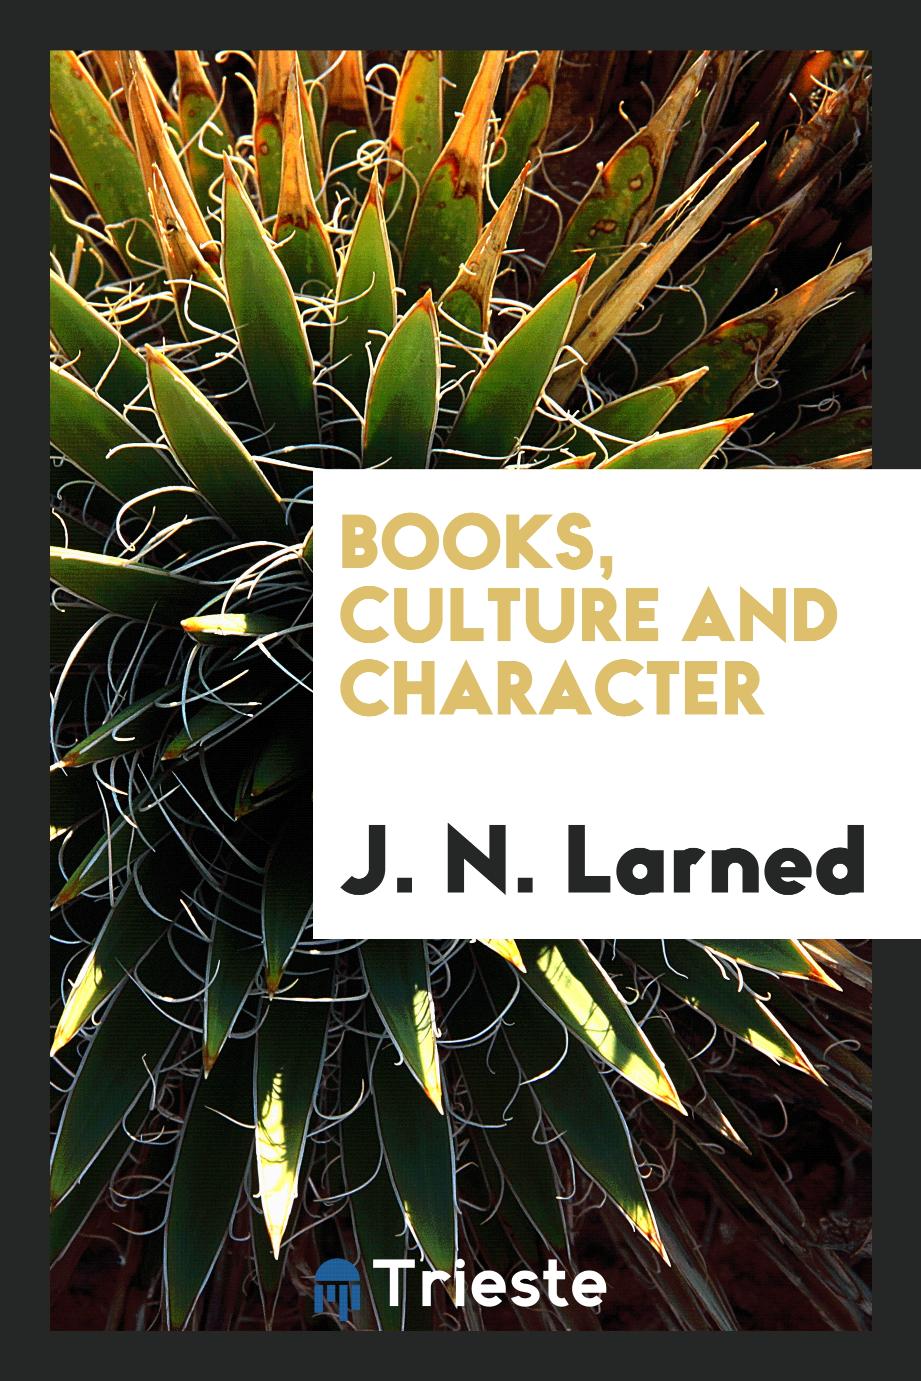 Books, culture and character